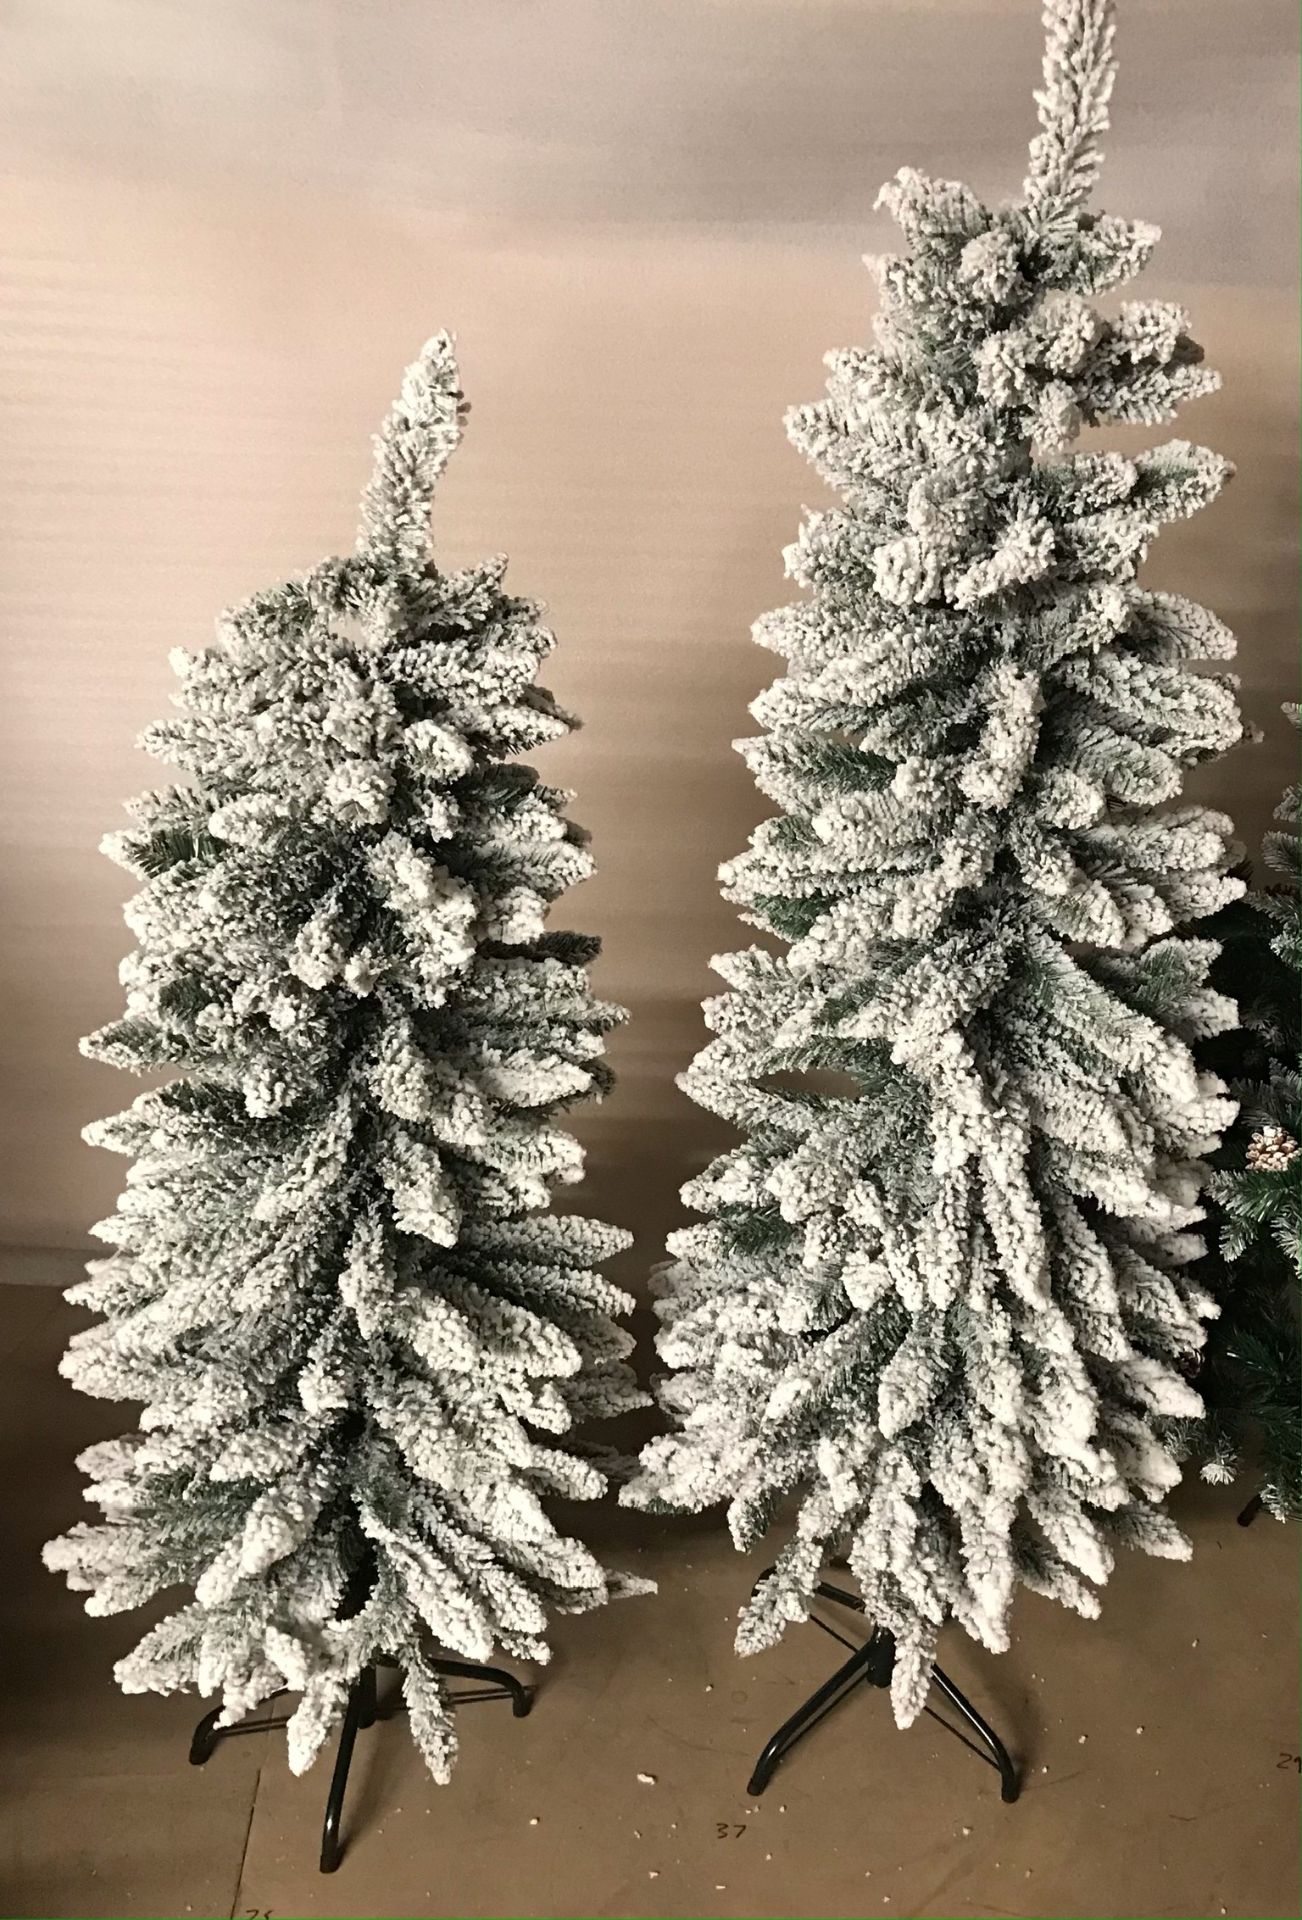 8 x 5ft Christmas Tree Artificial with Snow Frosted Tips Slim Pencil Shape - Image 2 of 2